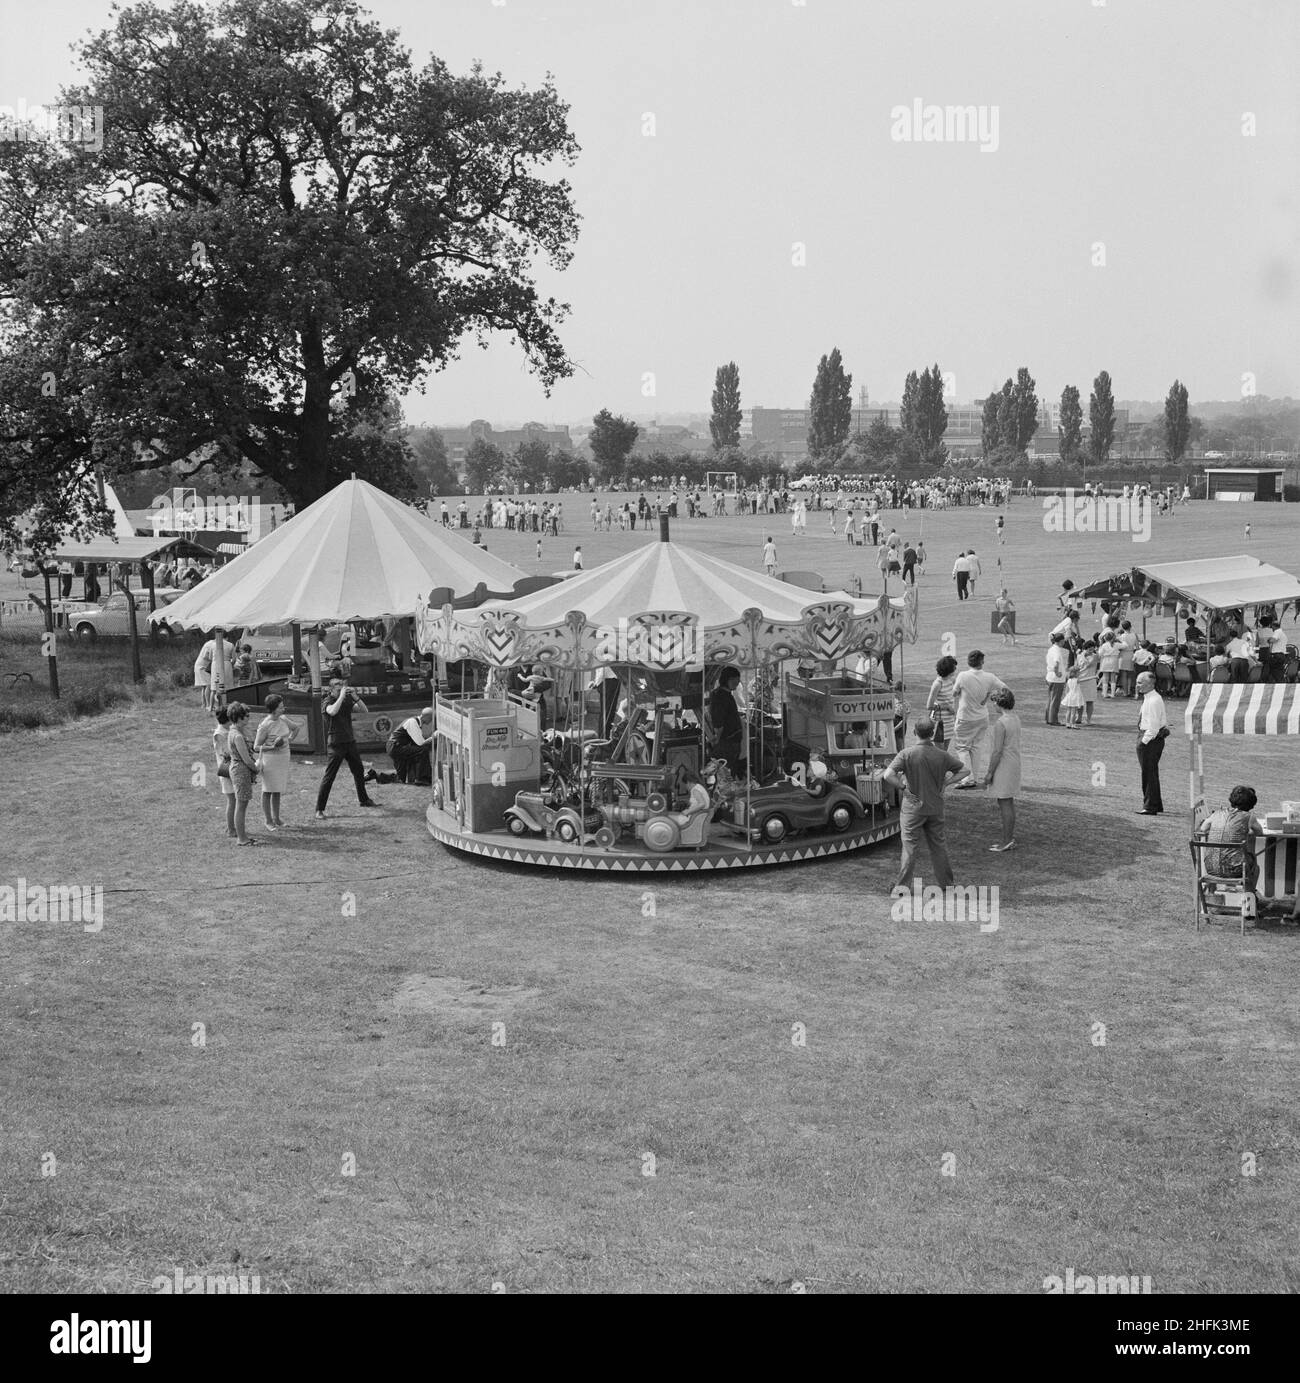 Laing Sports Ground, Rowley Lane, Elstree, Barnet, London, 14/06/1969. A view of a fairground carousel and stalls, with crowds gathered on a sports pitch beyond, during a Gala Day held at the Laing Sports Ground at Elstree. A Gala Day was held by Laing at the Laing Sports Ground on 14th June 1969, as a replacement of the annual Sports Day. Sports events were held by the Sports Club, which included hockey, tennis, bowls, and football tournaments. A traditional English fete programme featured coconut shies, bingo, pony rides, catering and a beer tent, candy floss, and roundabouts. The day ended Stock Photo